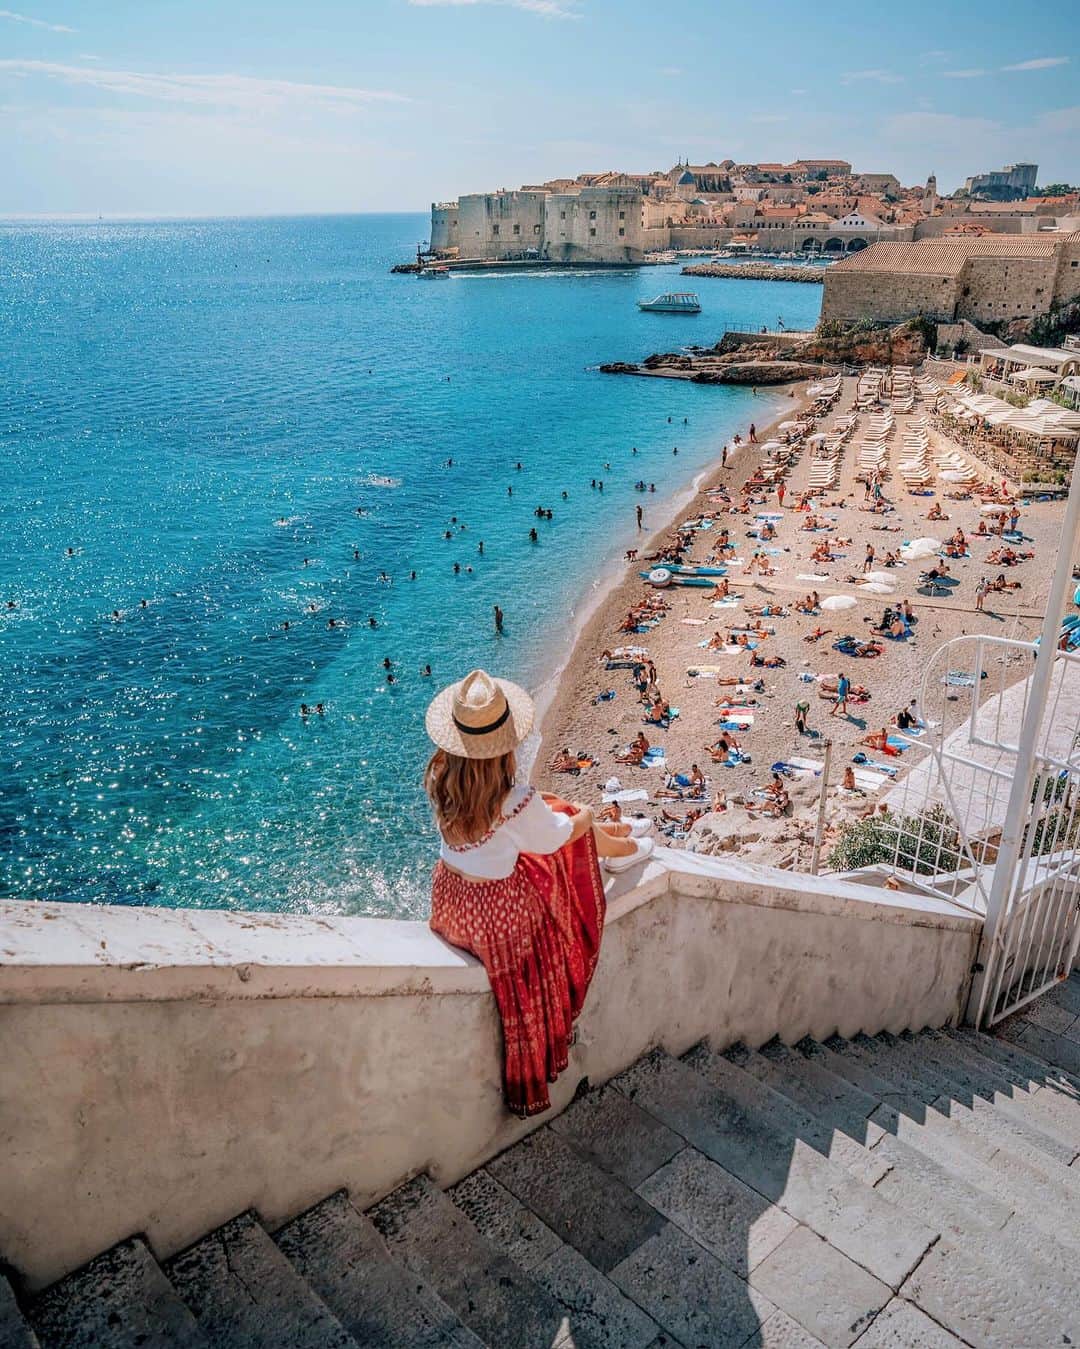 Izkizのインスタグラム：「Have you been to Dubrovnik? 🇭🇷 I can’t believe this is my first visit! I have fallen in love with this city…there’s so much to see & do, eat, great beaches and it’s steeped in history. We based ourselves at the beautiful @hotelvilladubrovnik which has such a good location, only a 15 minute walk to the old town and they run a shuttle service too!  1. ⛱️ Banje Beach (10 minute walk from @hotelvilladubrovnik)  2. 📚 Found the perfect reading spot  3. 💦 The Mermaid Pool at Villa Dubrovnik 4. 🍓 Freshest fruit at the local market 5. 👙 Love the beach area at Villa Dubrovnik 6. 🌊 Crystal clear waters at Banje Beach  7. ☀️ Sunset over the old town from the wine bar at Villa Dubrovnik」